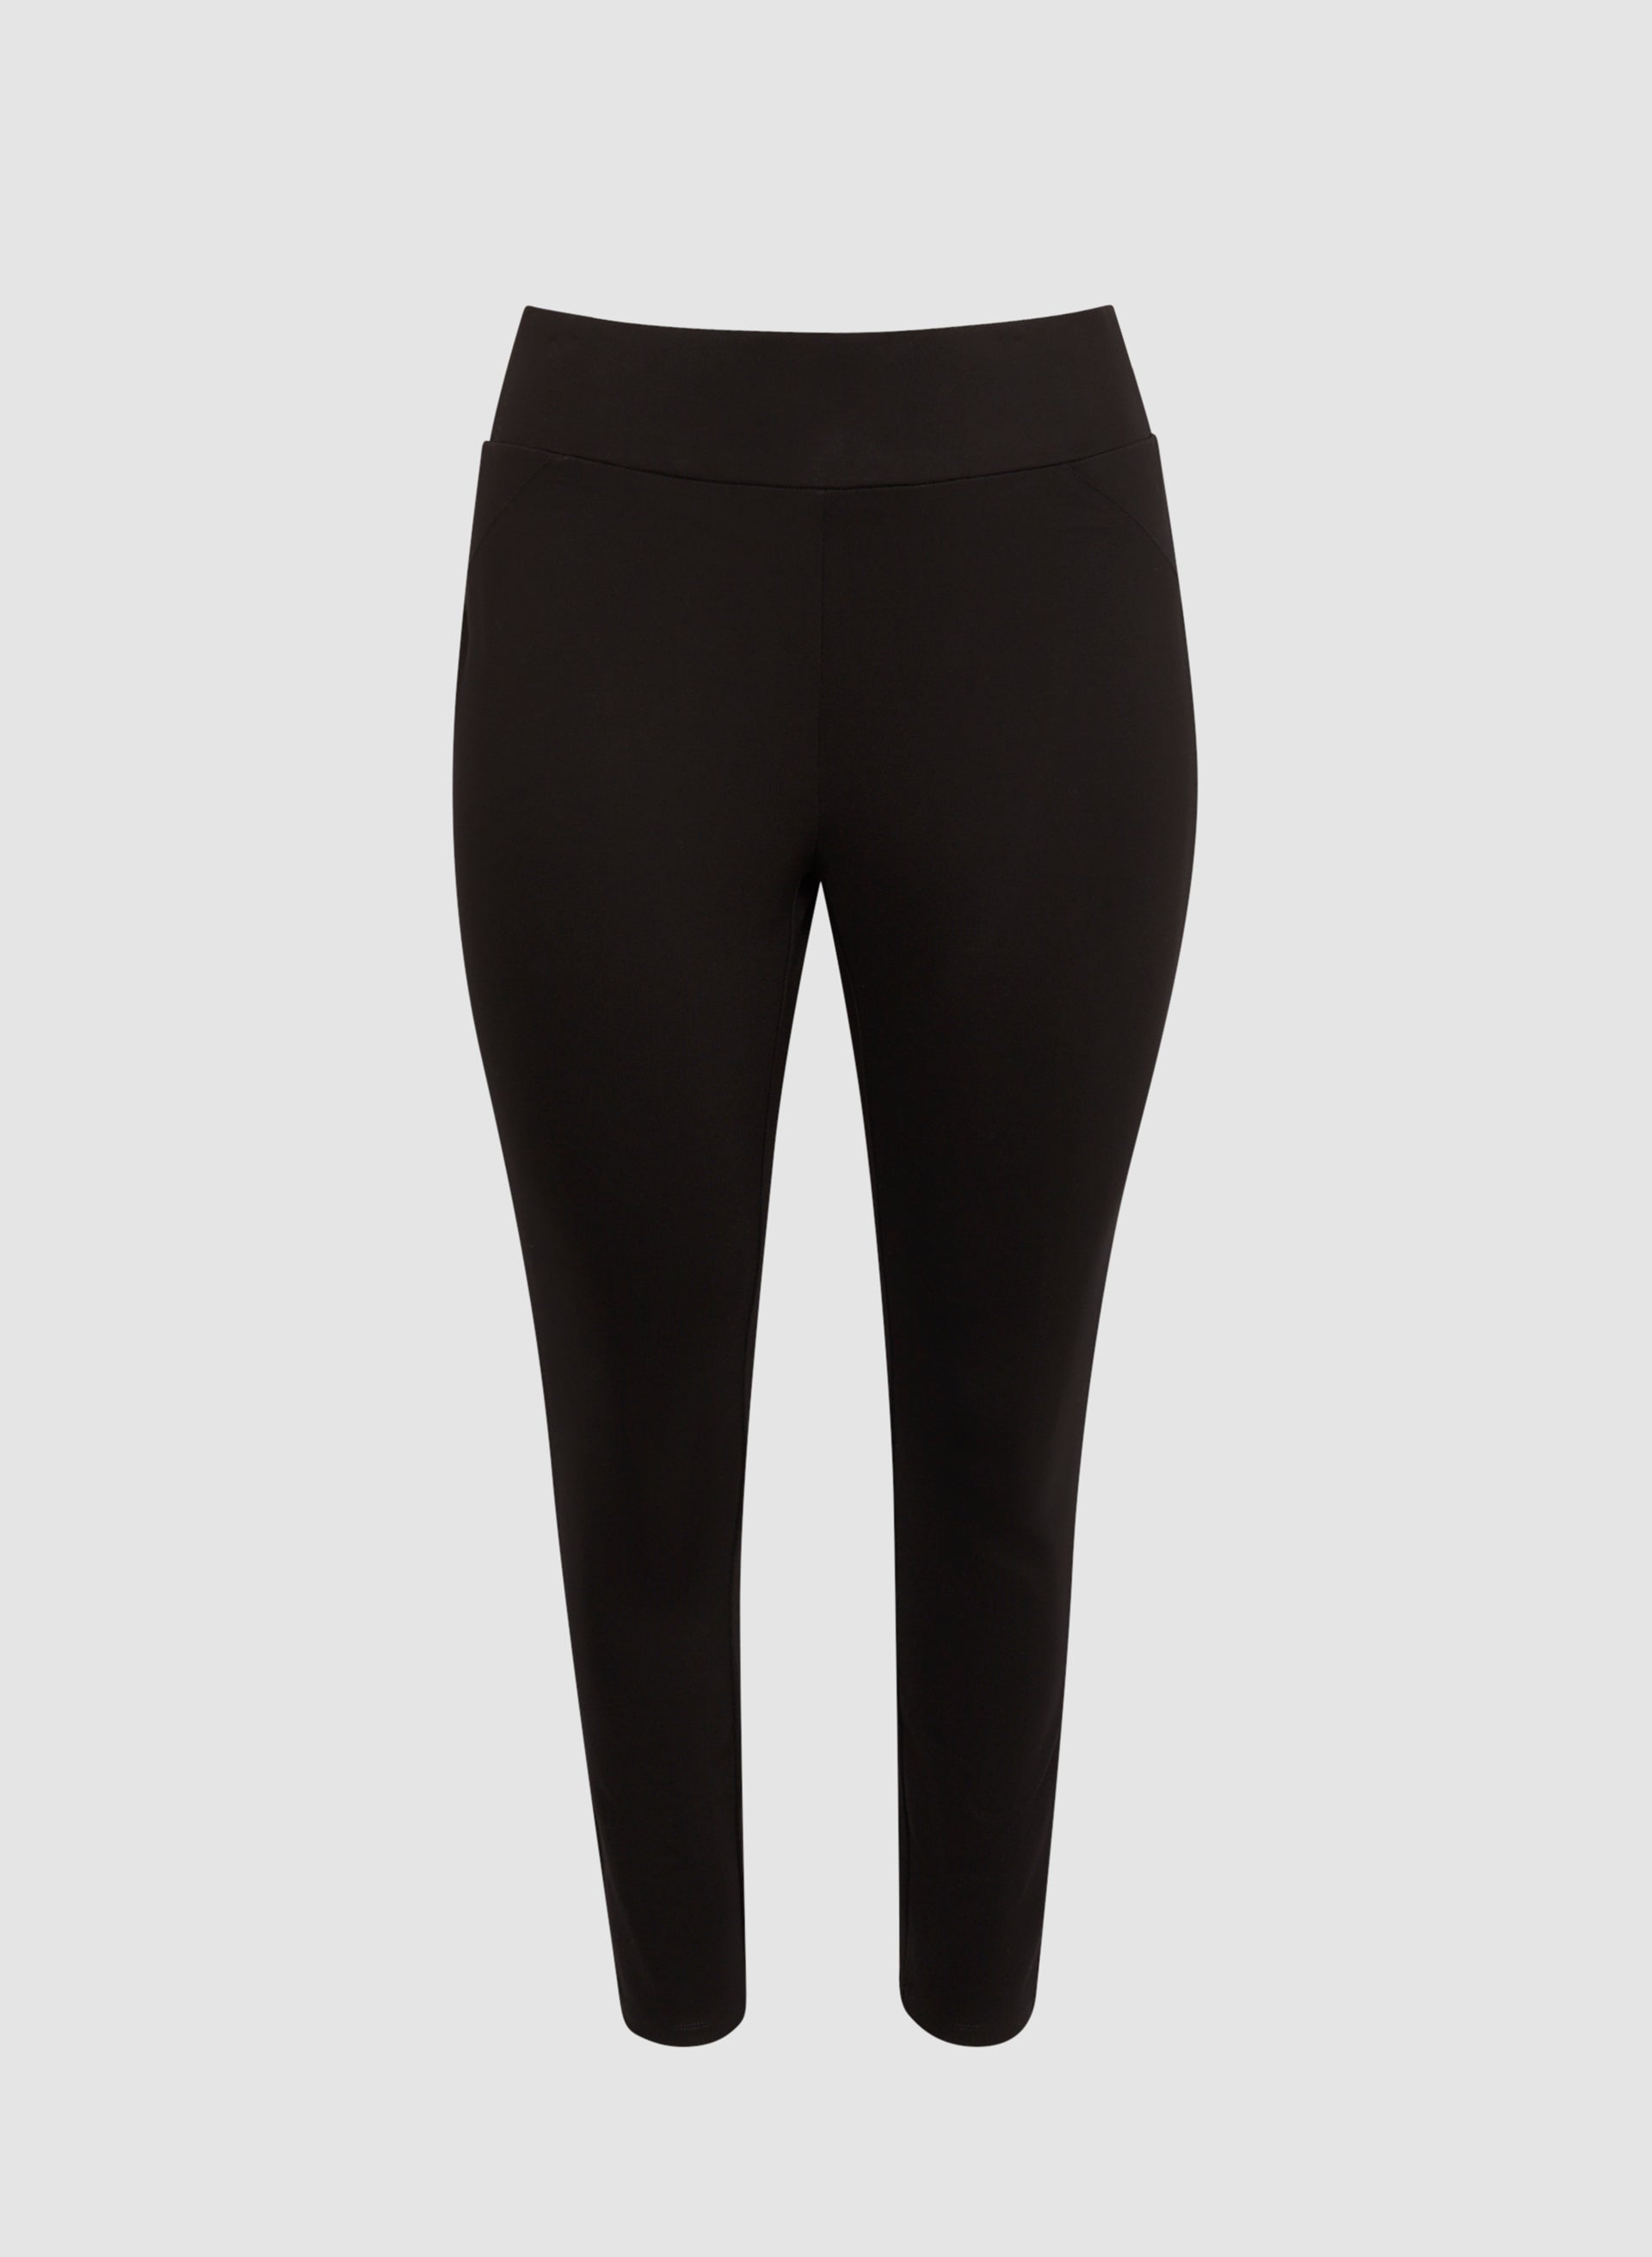 Verso - Our fab Lisa Leggings ❤️ €15 Size small (fits